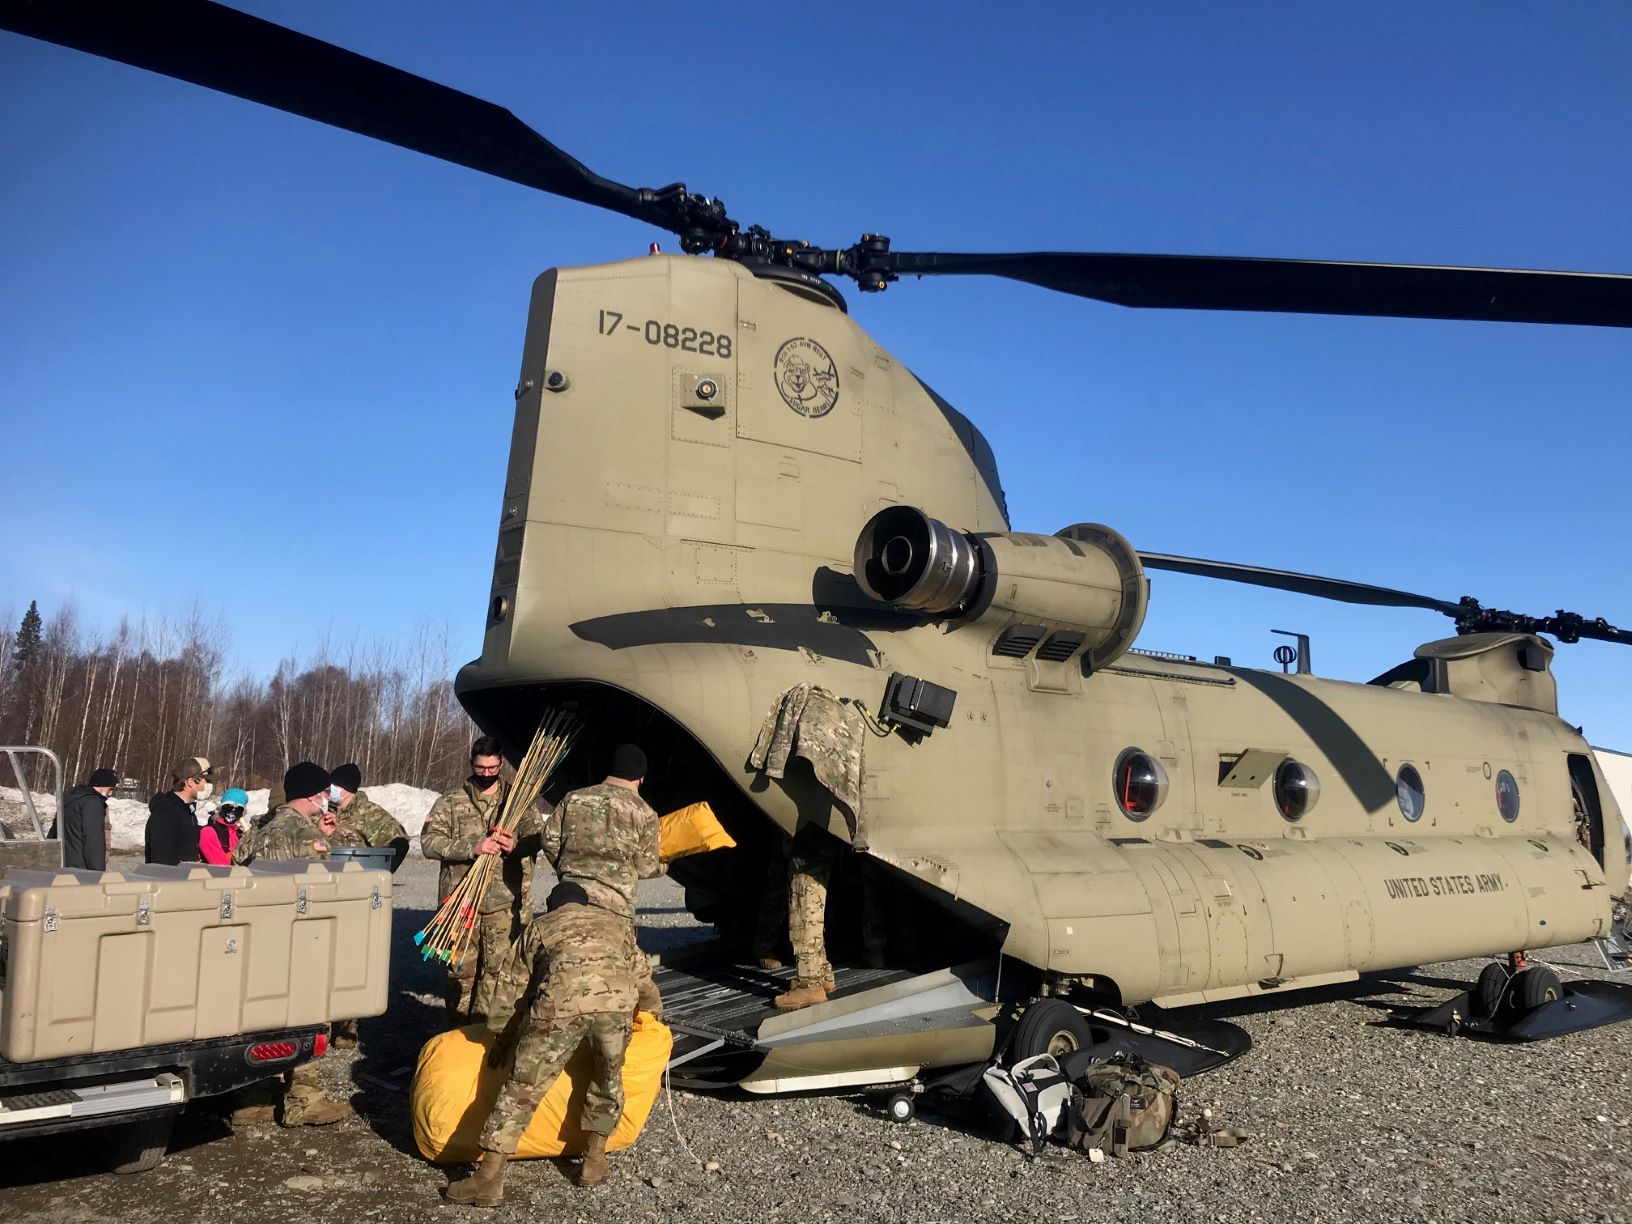 US Army soldiers load up Chinook helicopter with Denali mountain gear